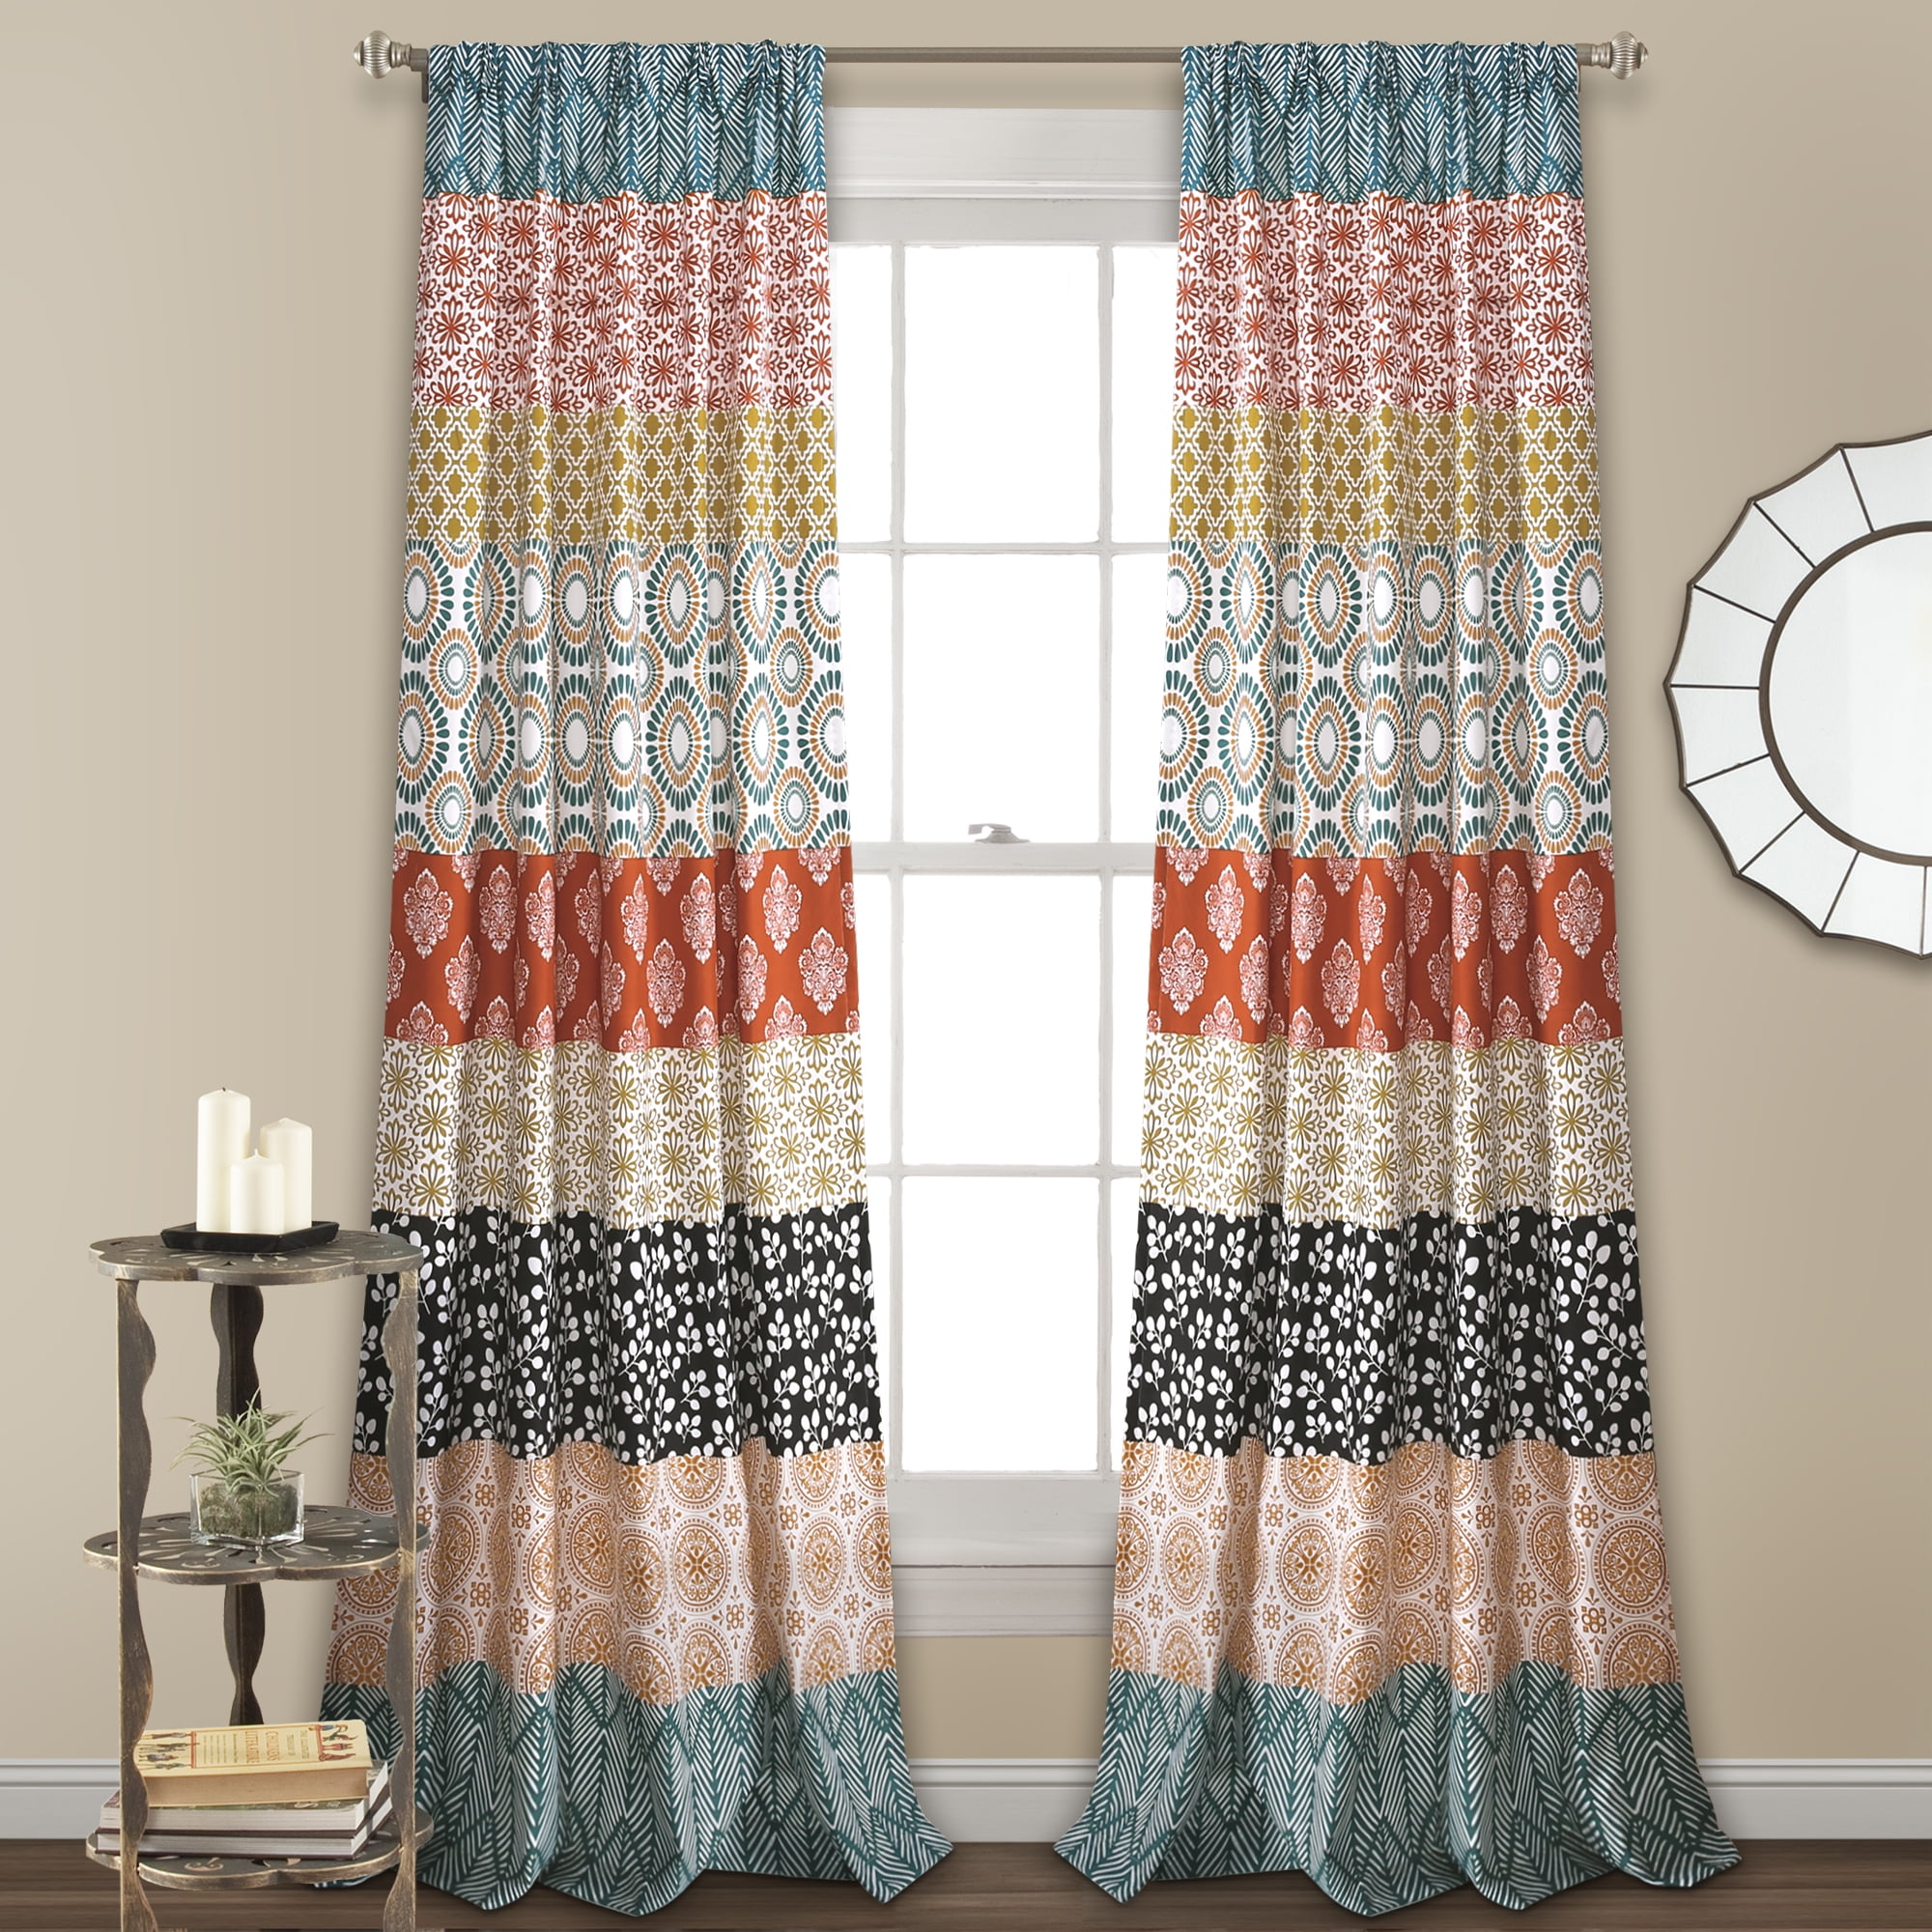 Texas Star Curtains 2 Panel Set for Decor 5 Sizes Available Window Drapes 